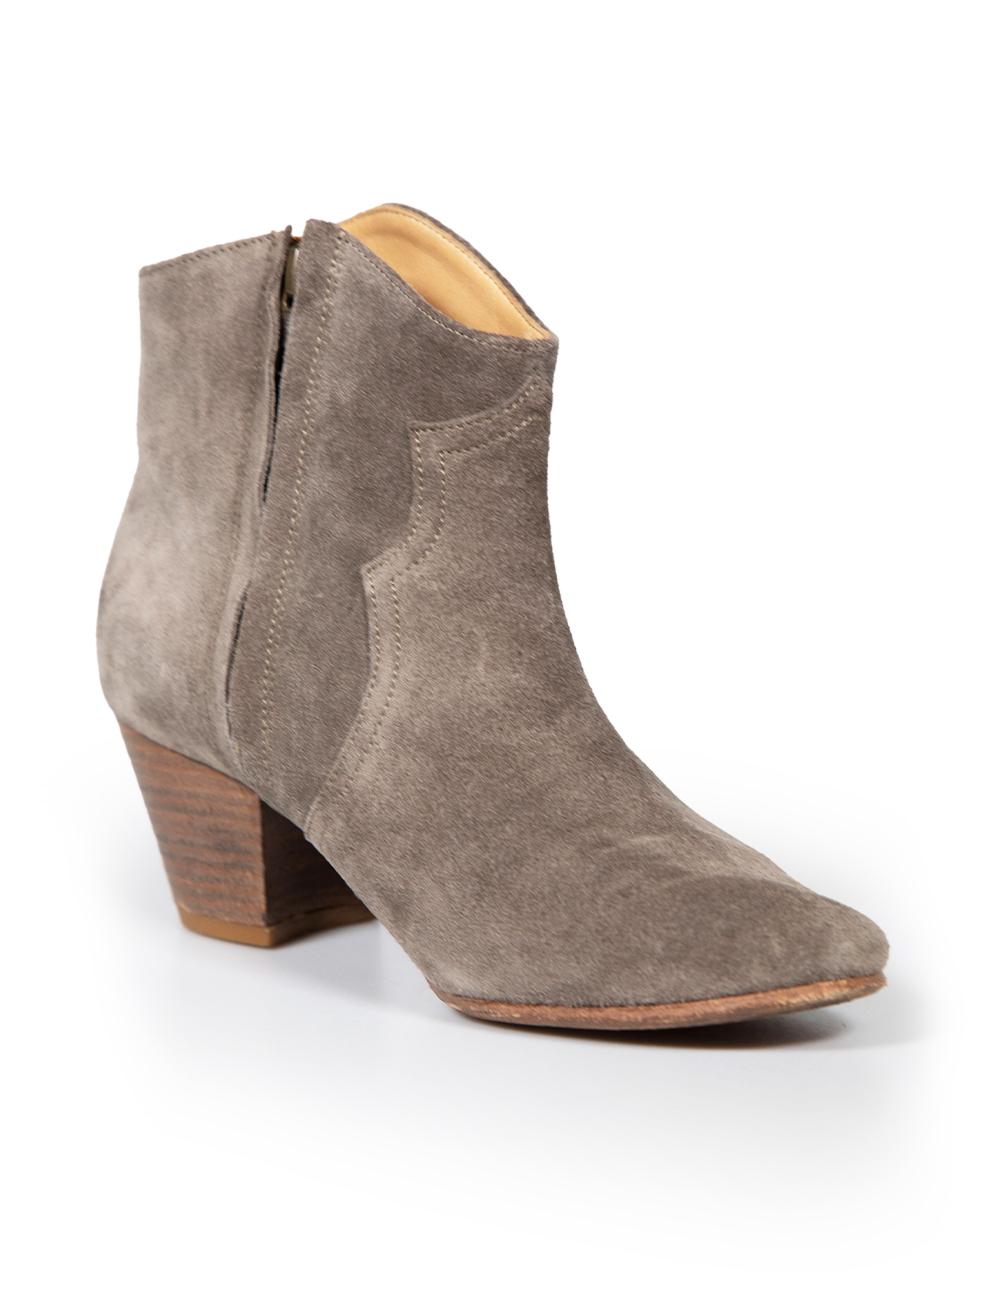 CONDITION is Very good. Minimal wear to boots is evident. Minimal wear to soles, with a small mark to the left shoe left side on this used Isabel Marant designer resale item.
 
 
 
 Details
 
 
 Grey
 
 Suede
 
 Ankle boots
 
 Round toe
 
 Mid heel
